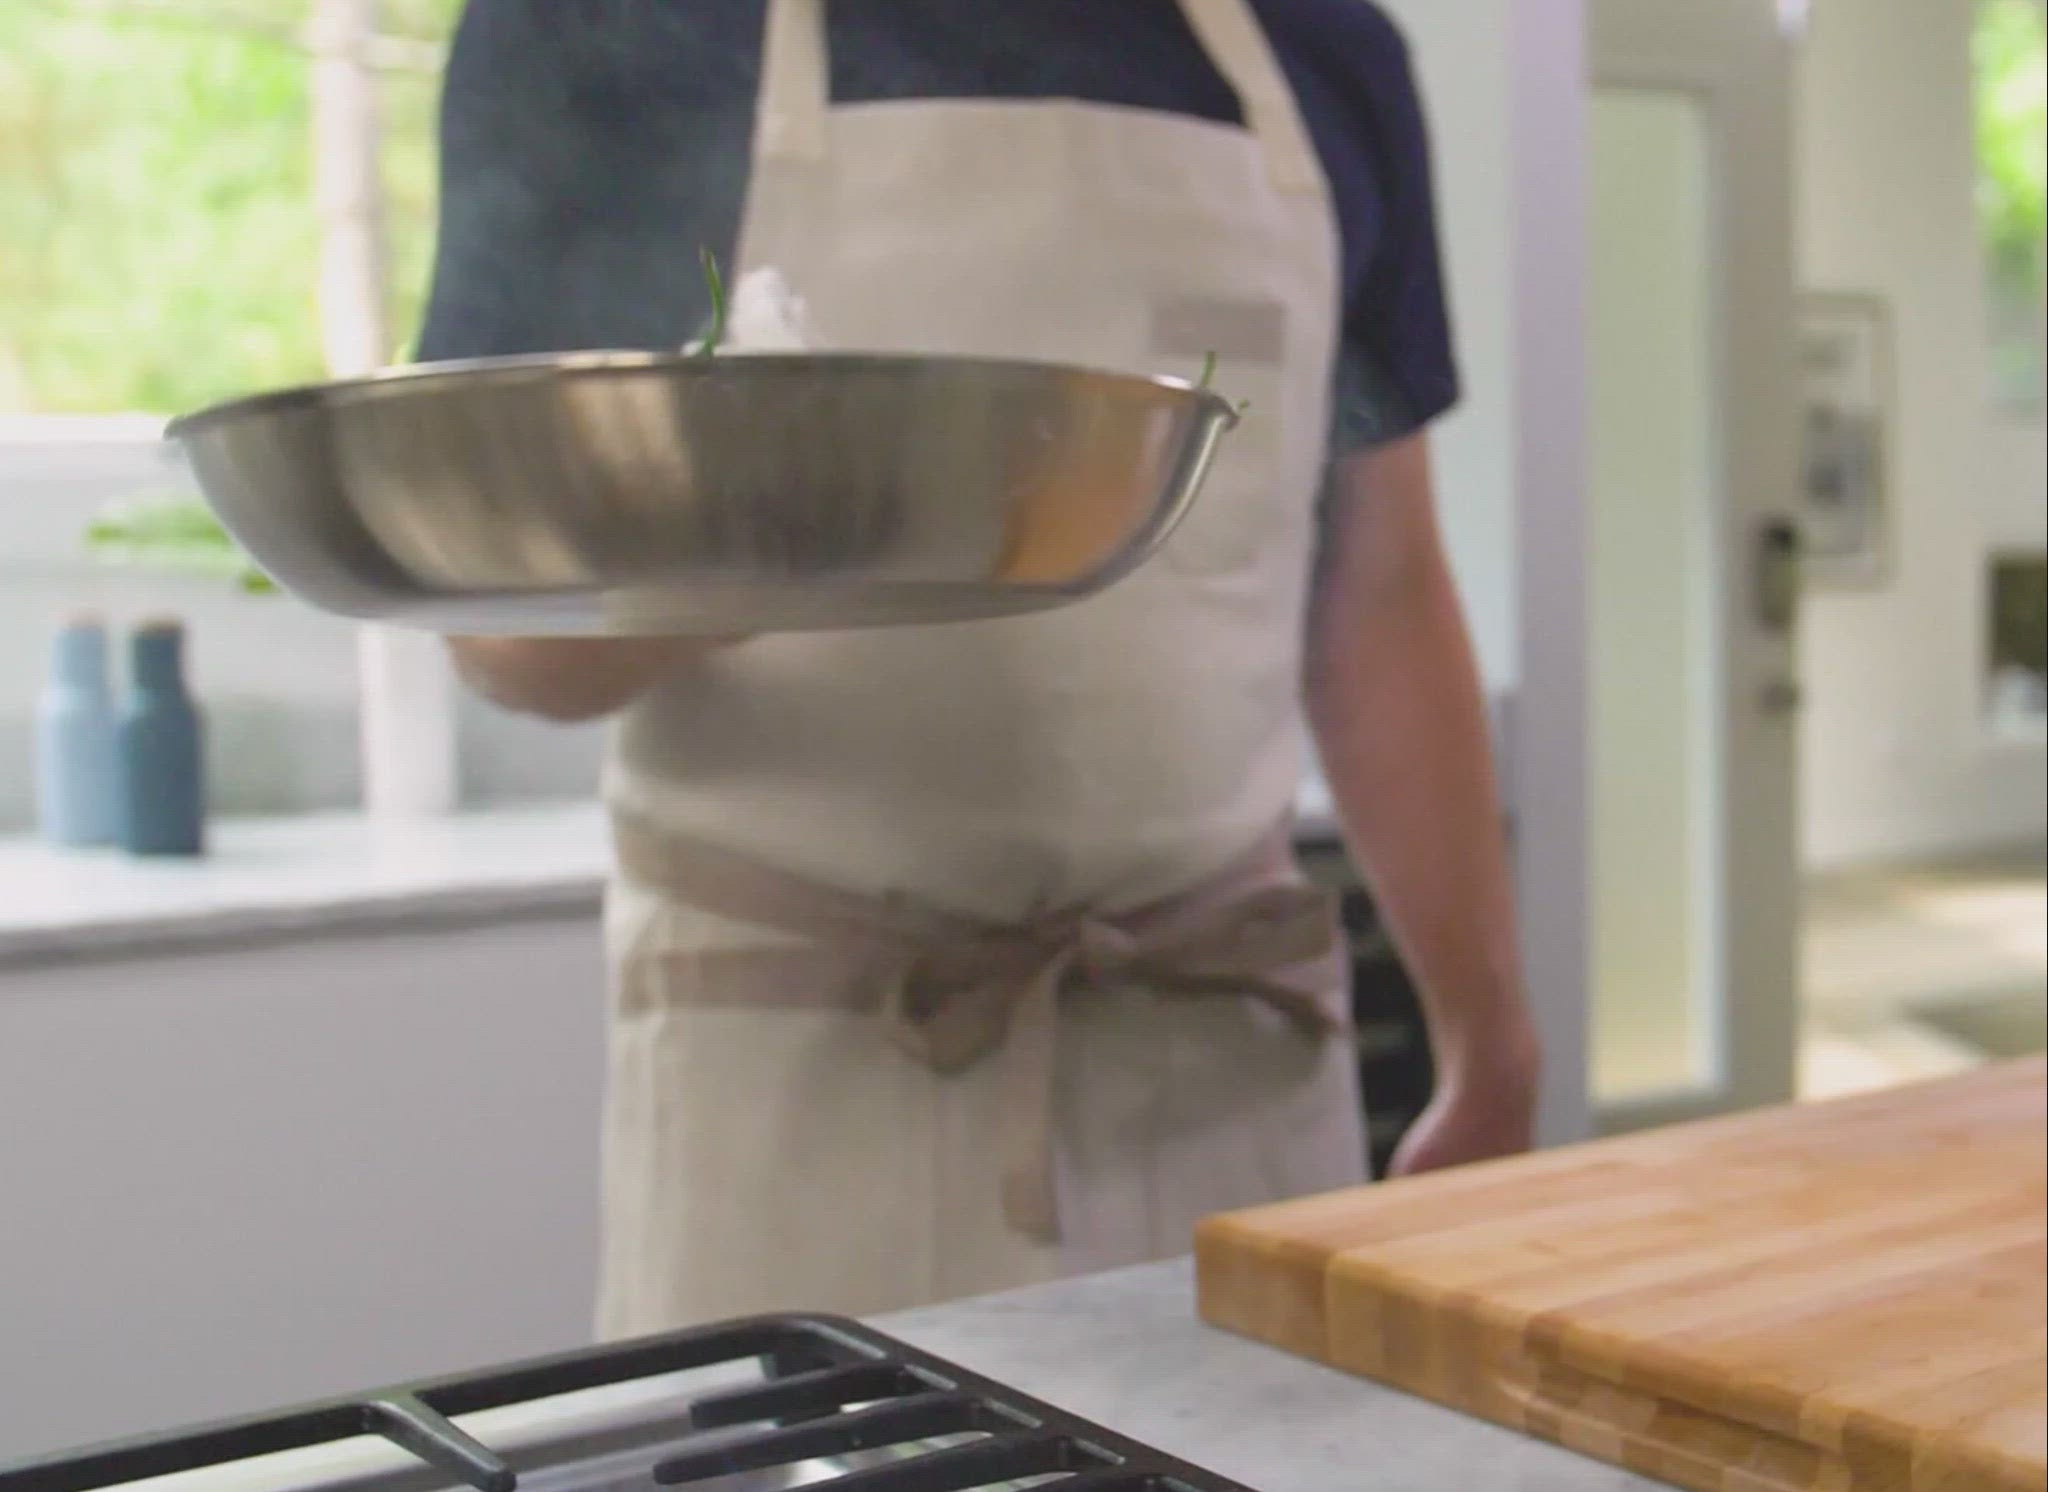 A video of a chef using a Misen Stainless Steel Pan to toss shishito peppers over a stovetop.